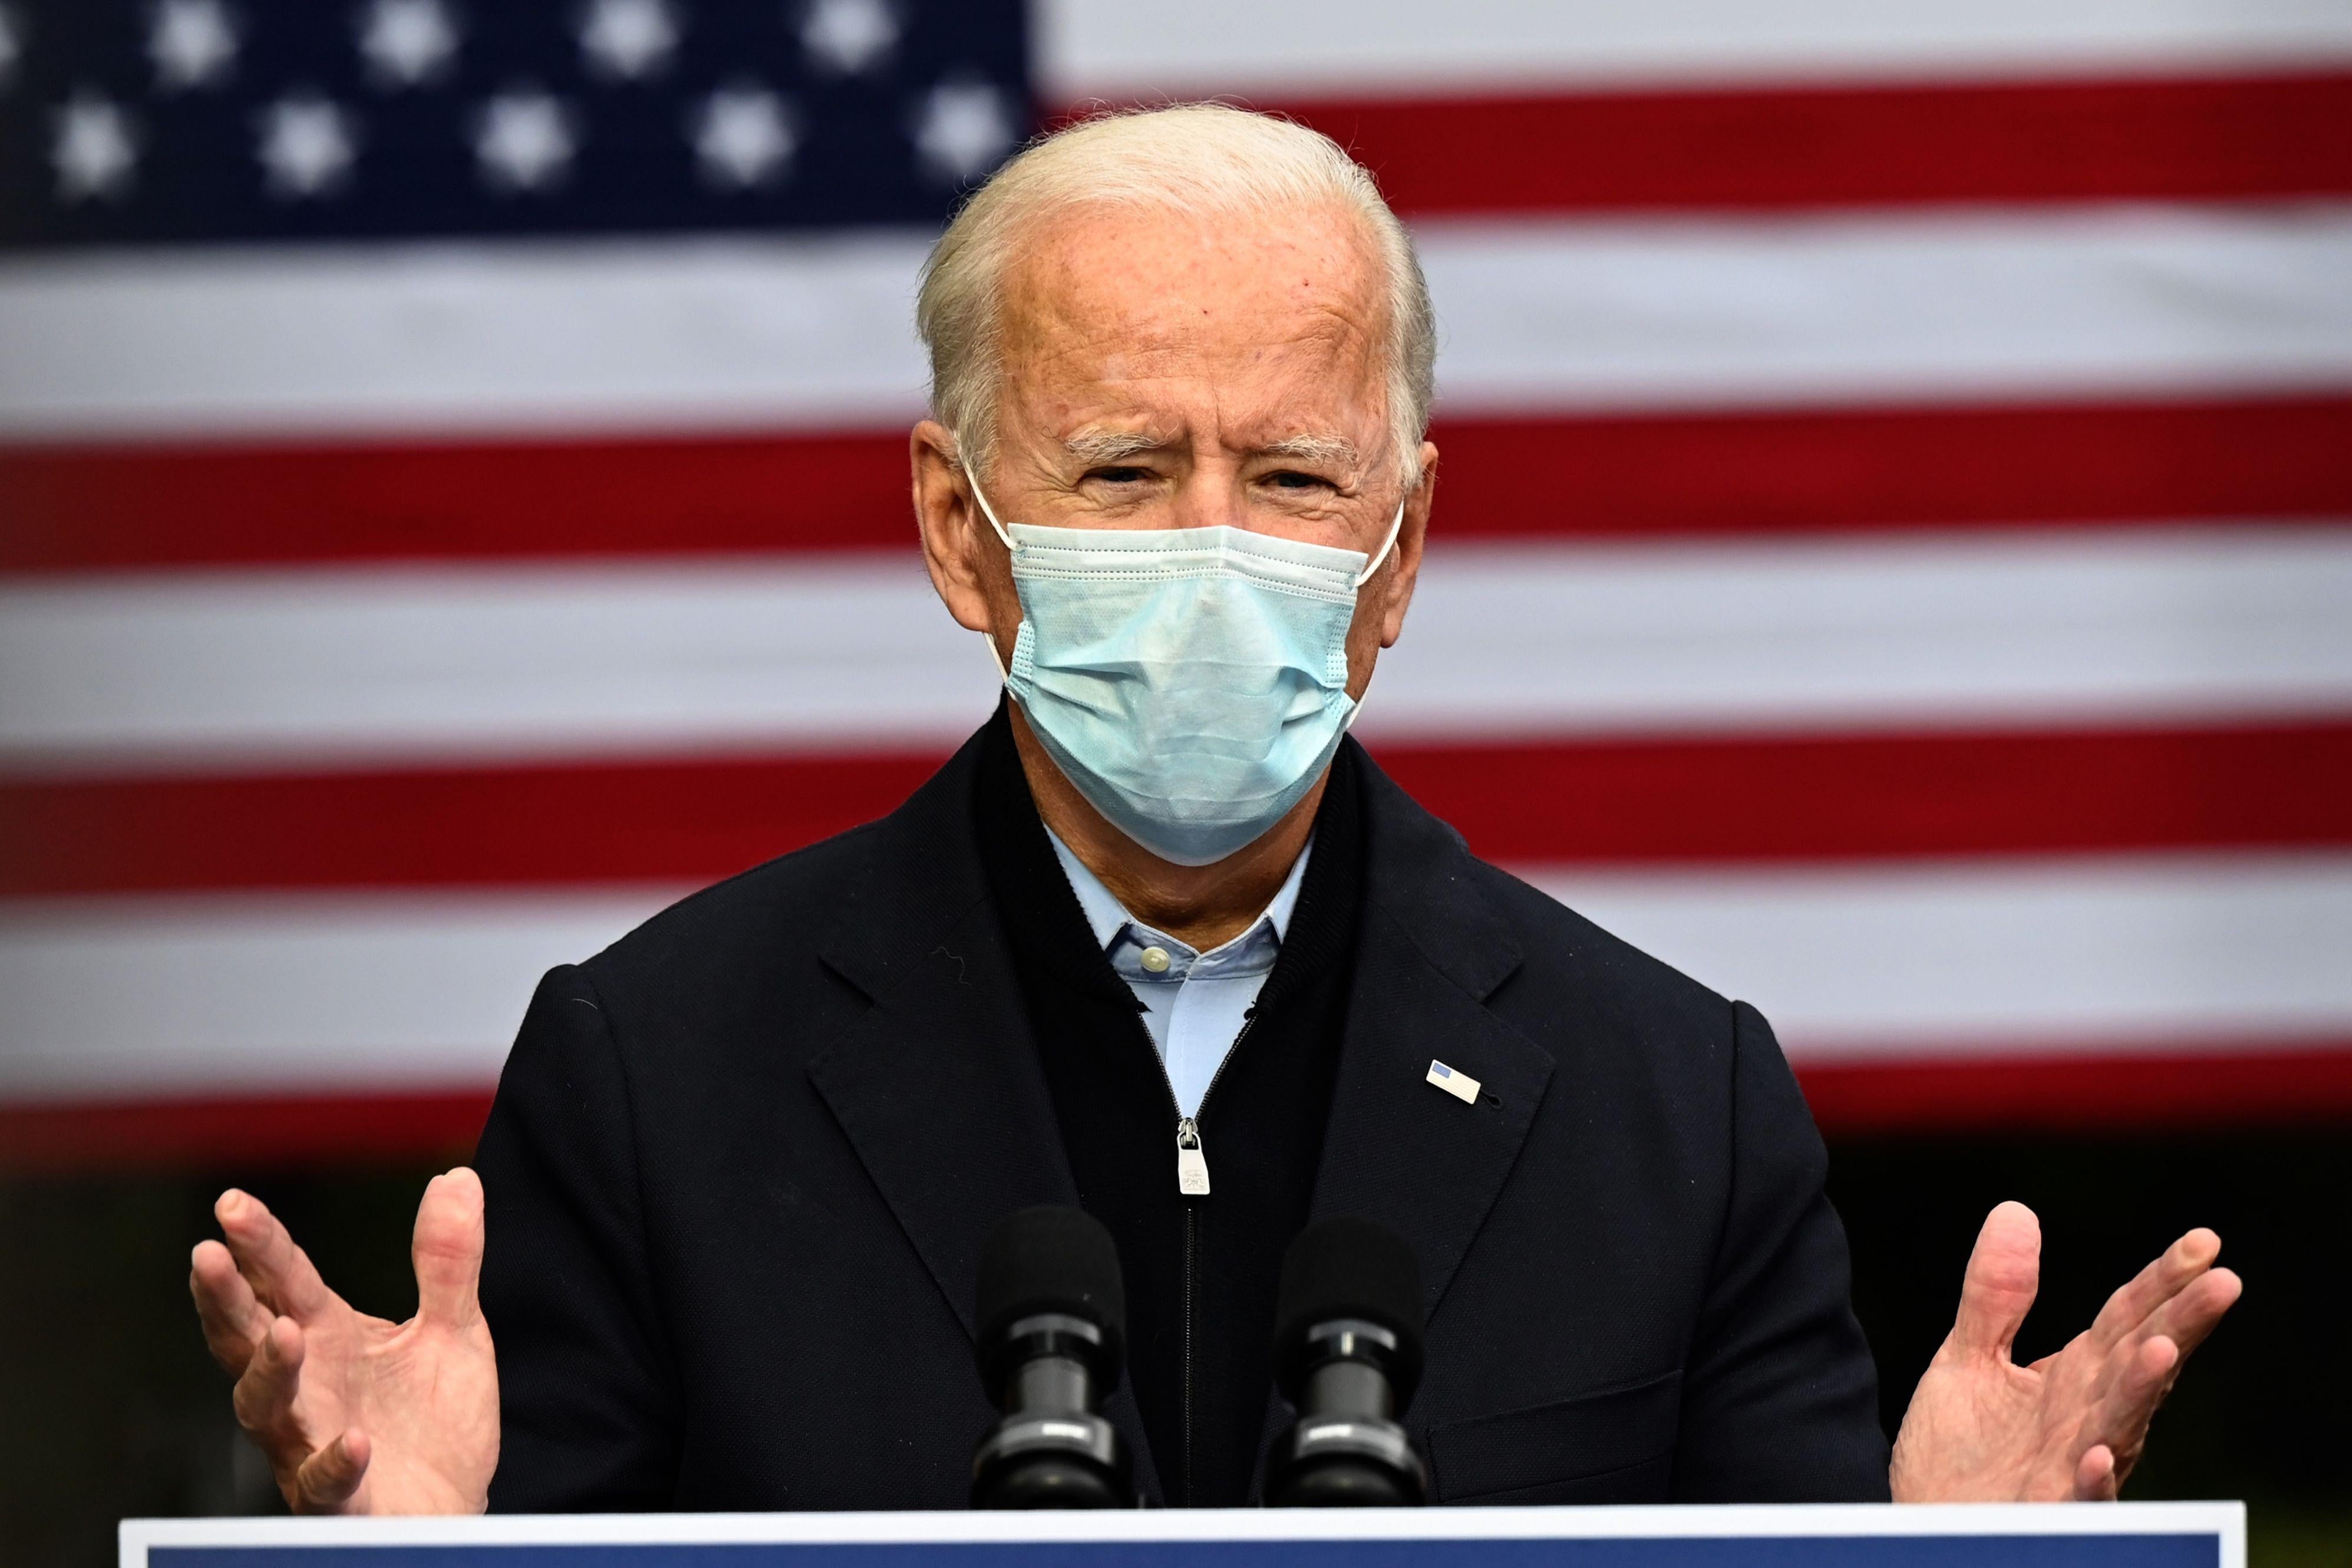 Joe Biden stands in front of a flag, wearing a surgical mask and speaking from a lectern.